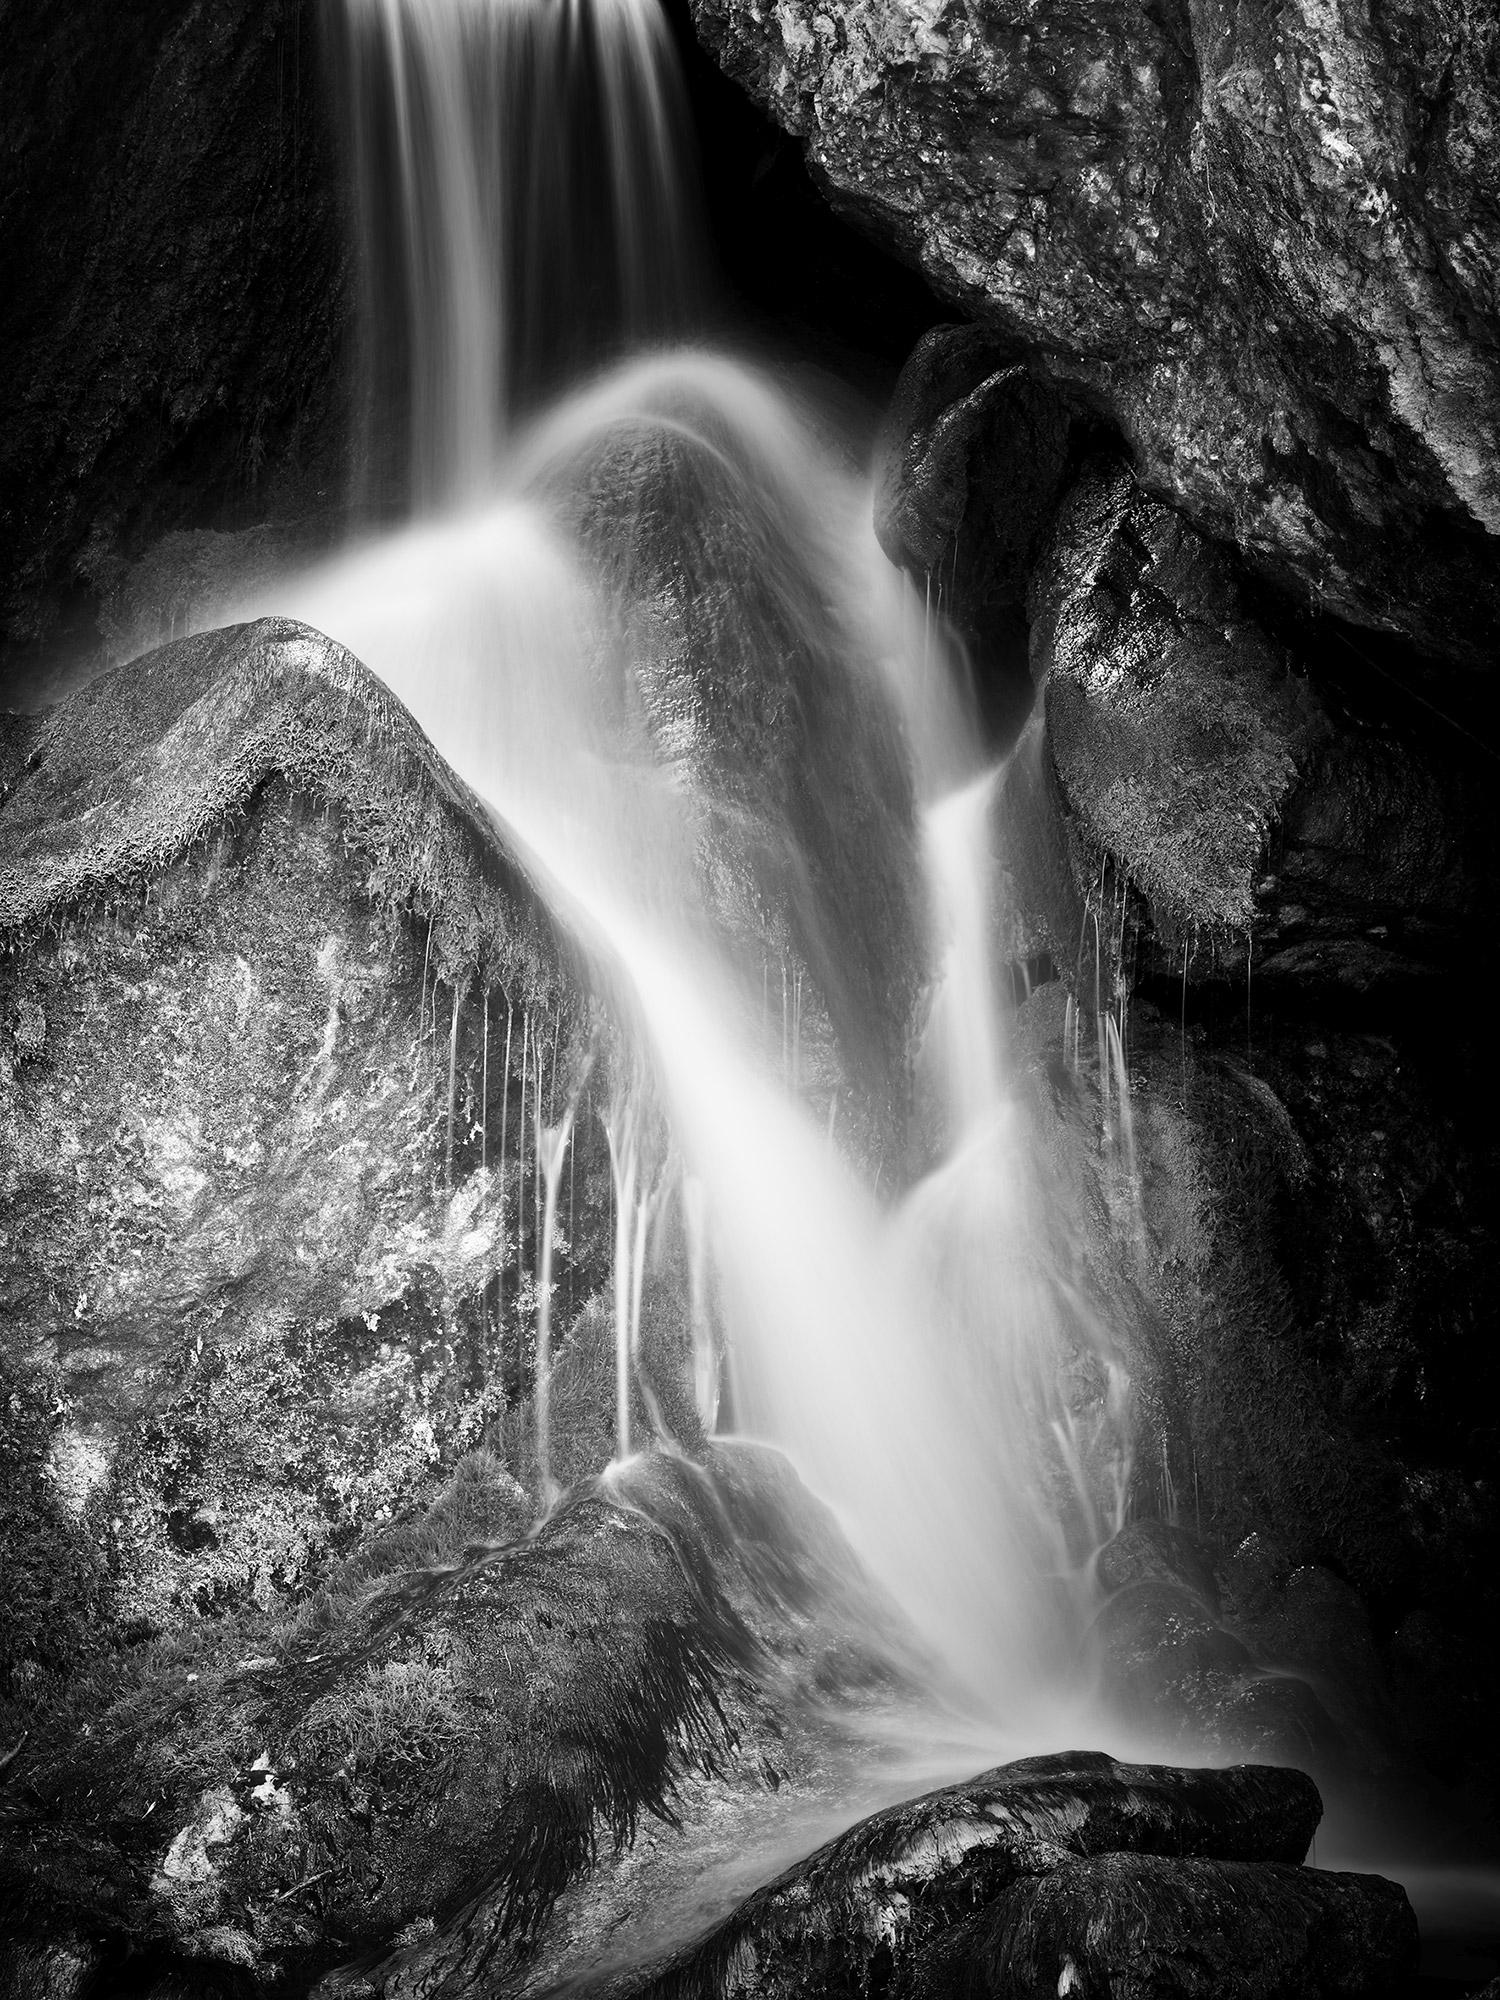 Gerald Berghammer Landscape Photograph - Waterfall detail, black and white long exposure waterscape fine art photography